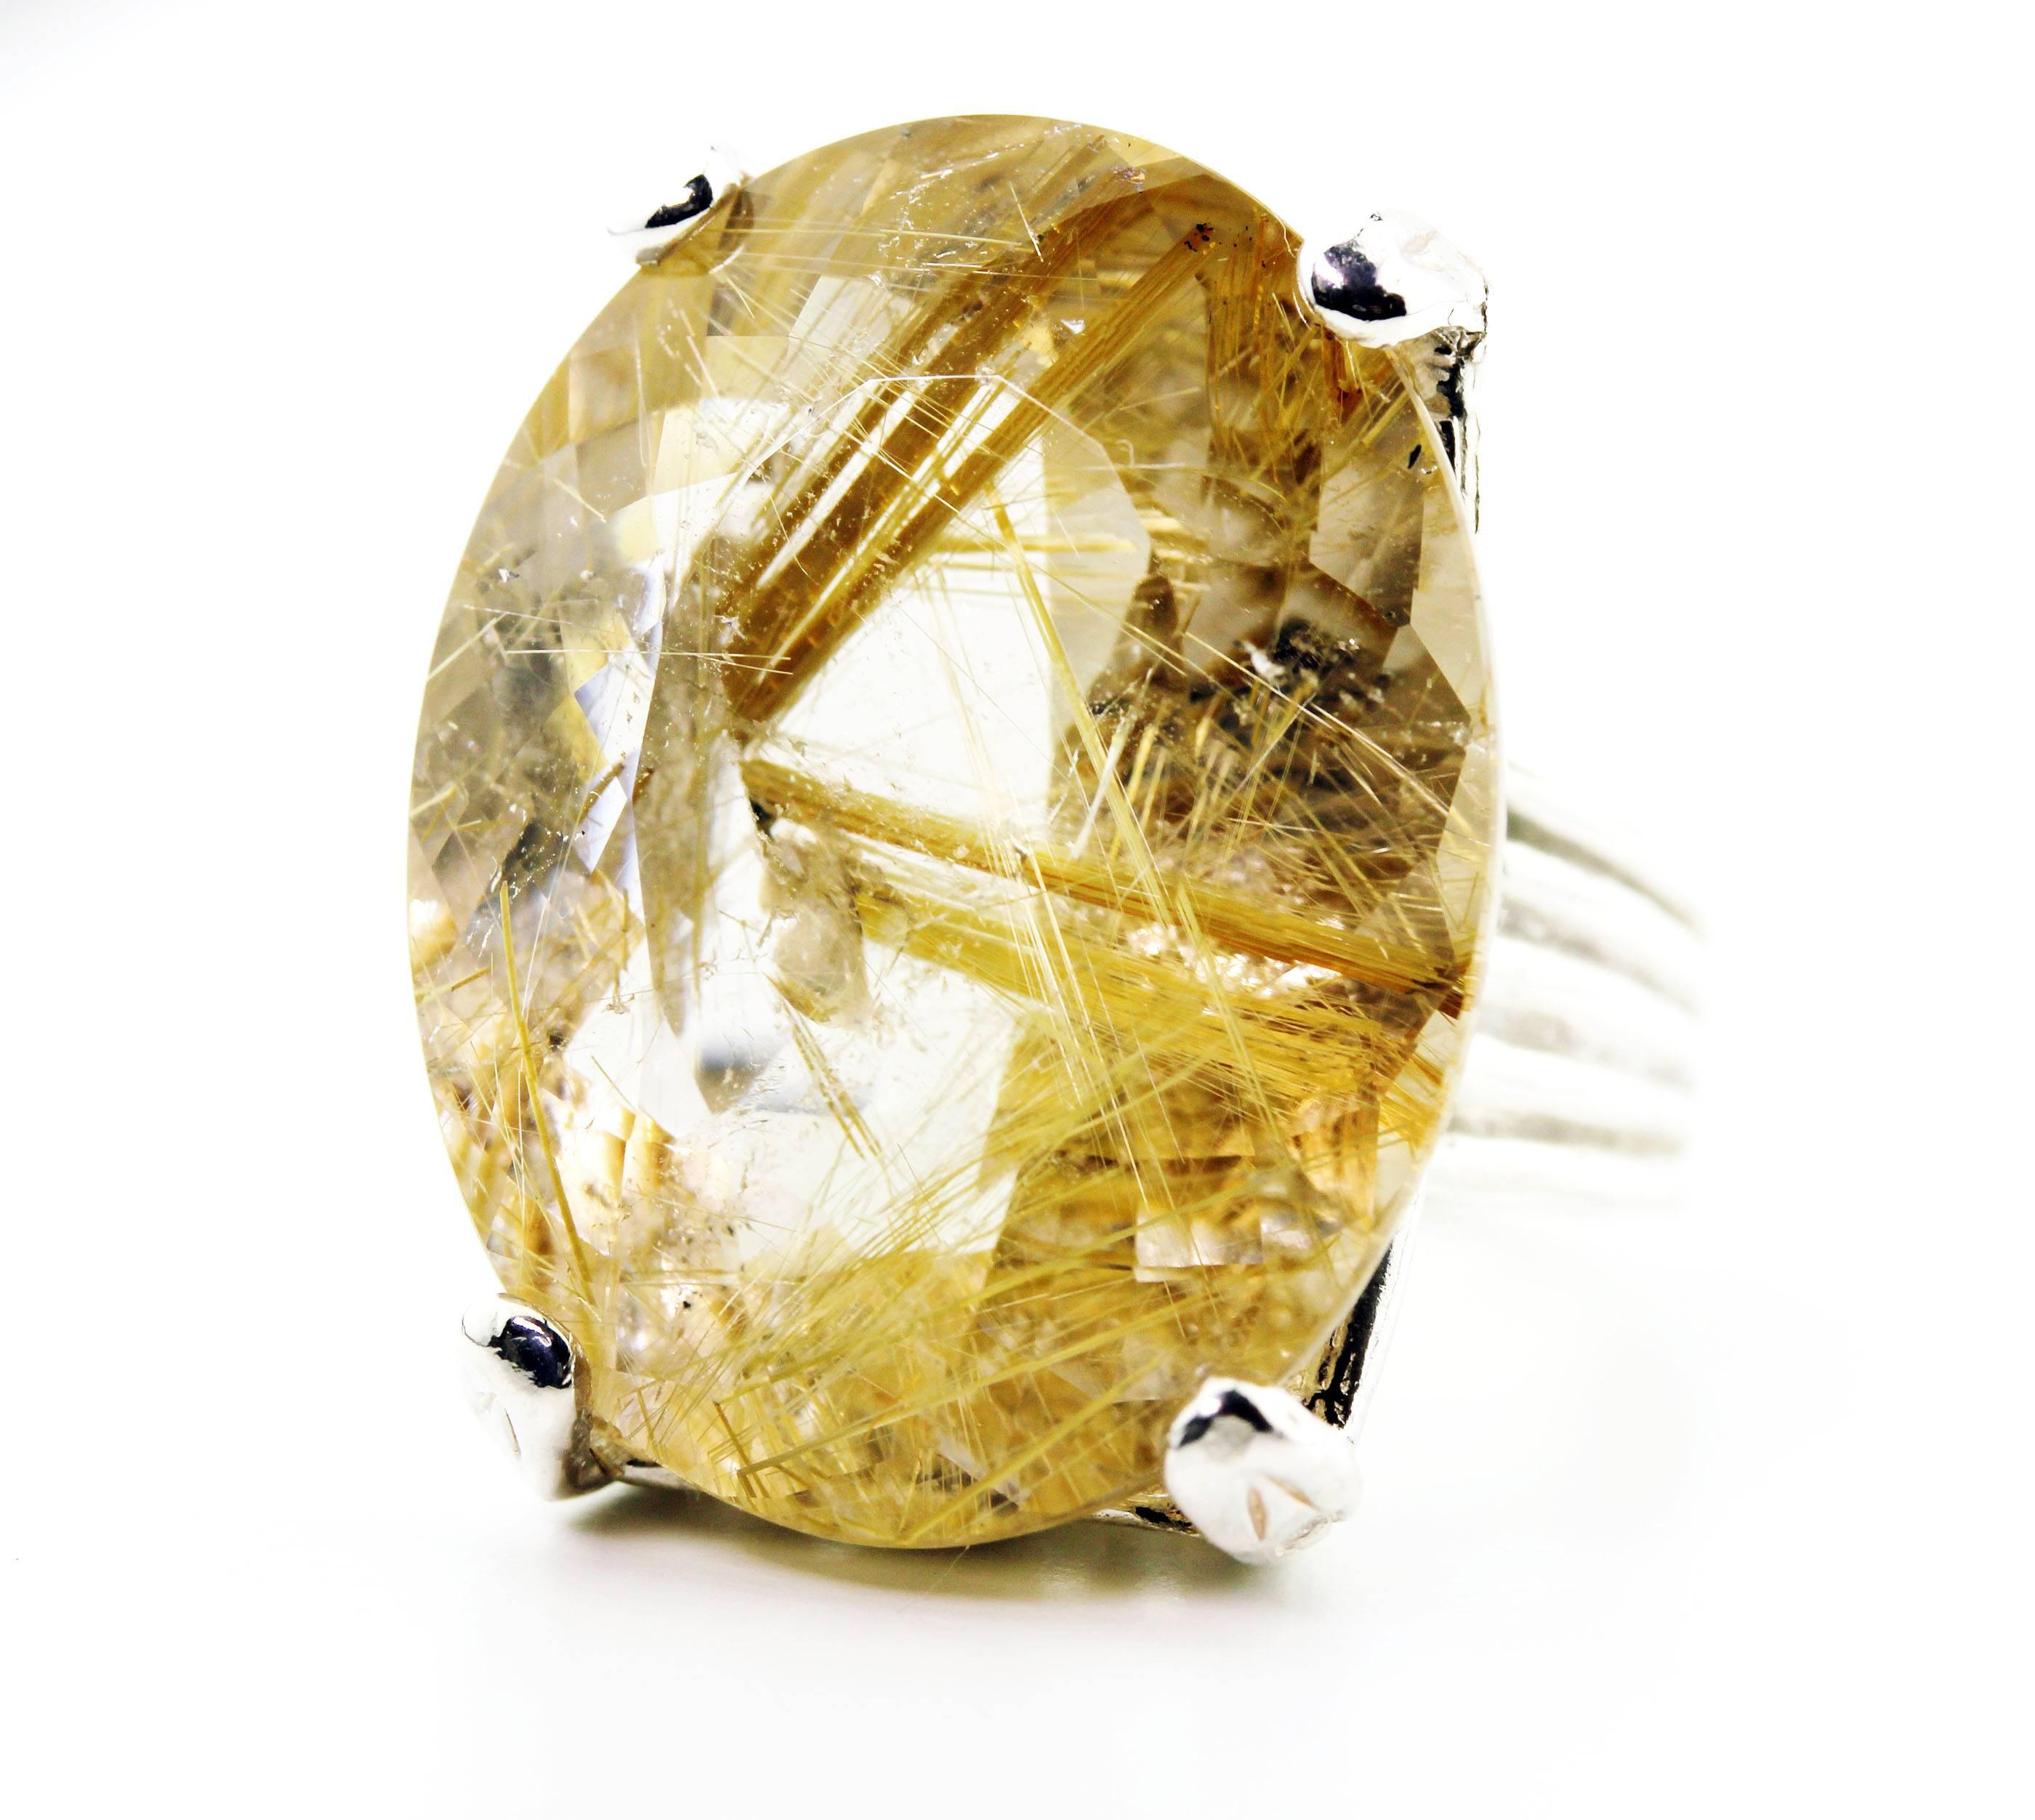 Golden translucent 77.20 carat sparkling Rutilated Quartz - gold color rutilation -  set in a Sterling Silver ring size 8.5 (sizable).  The gemstone measures 28.3 mm x 22 mm.    More from this seller by putting gemjunky into 1stdibs search bar.